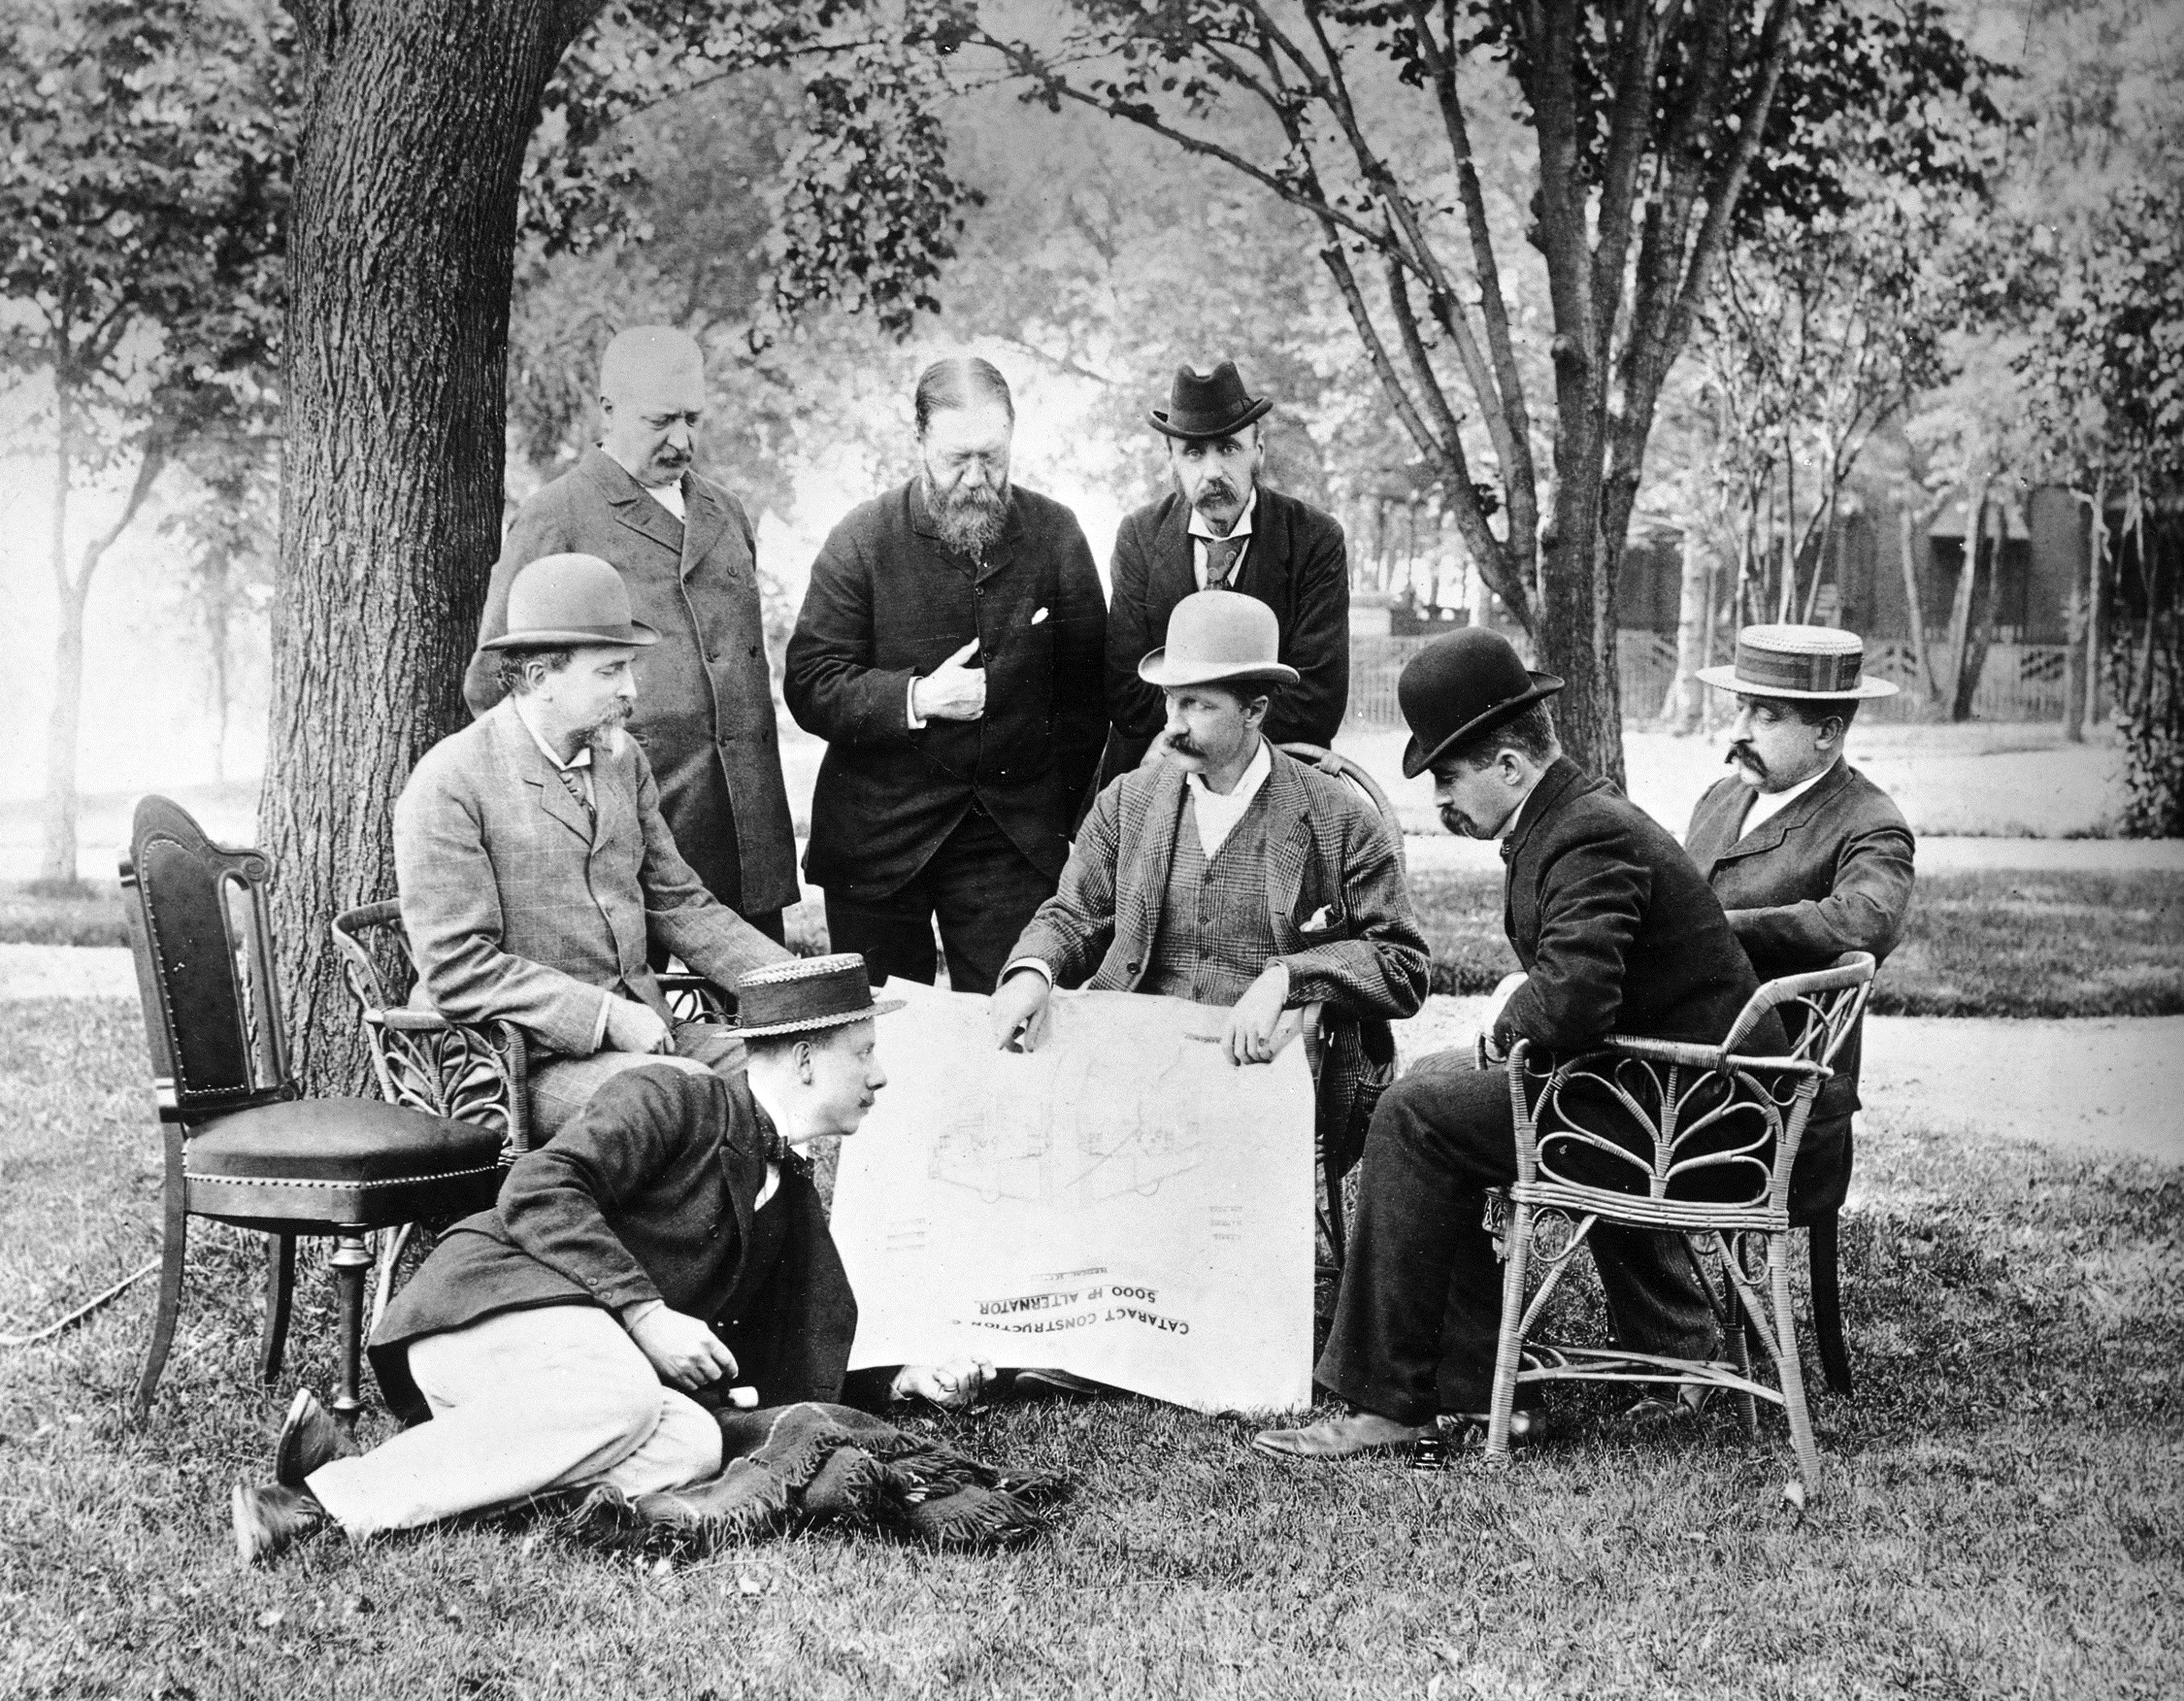 Sir William Henry Preece (standing, centre) with engineers discussing the Niagara Falls Power Scheme c 1895 ref. Image 1/1/0383.04